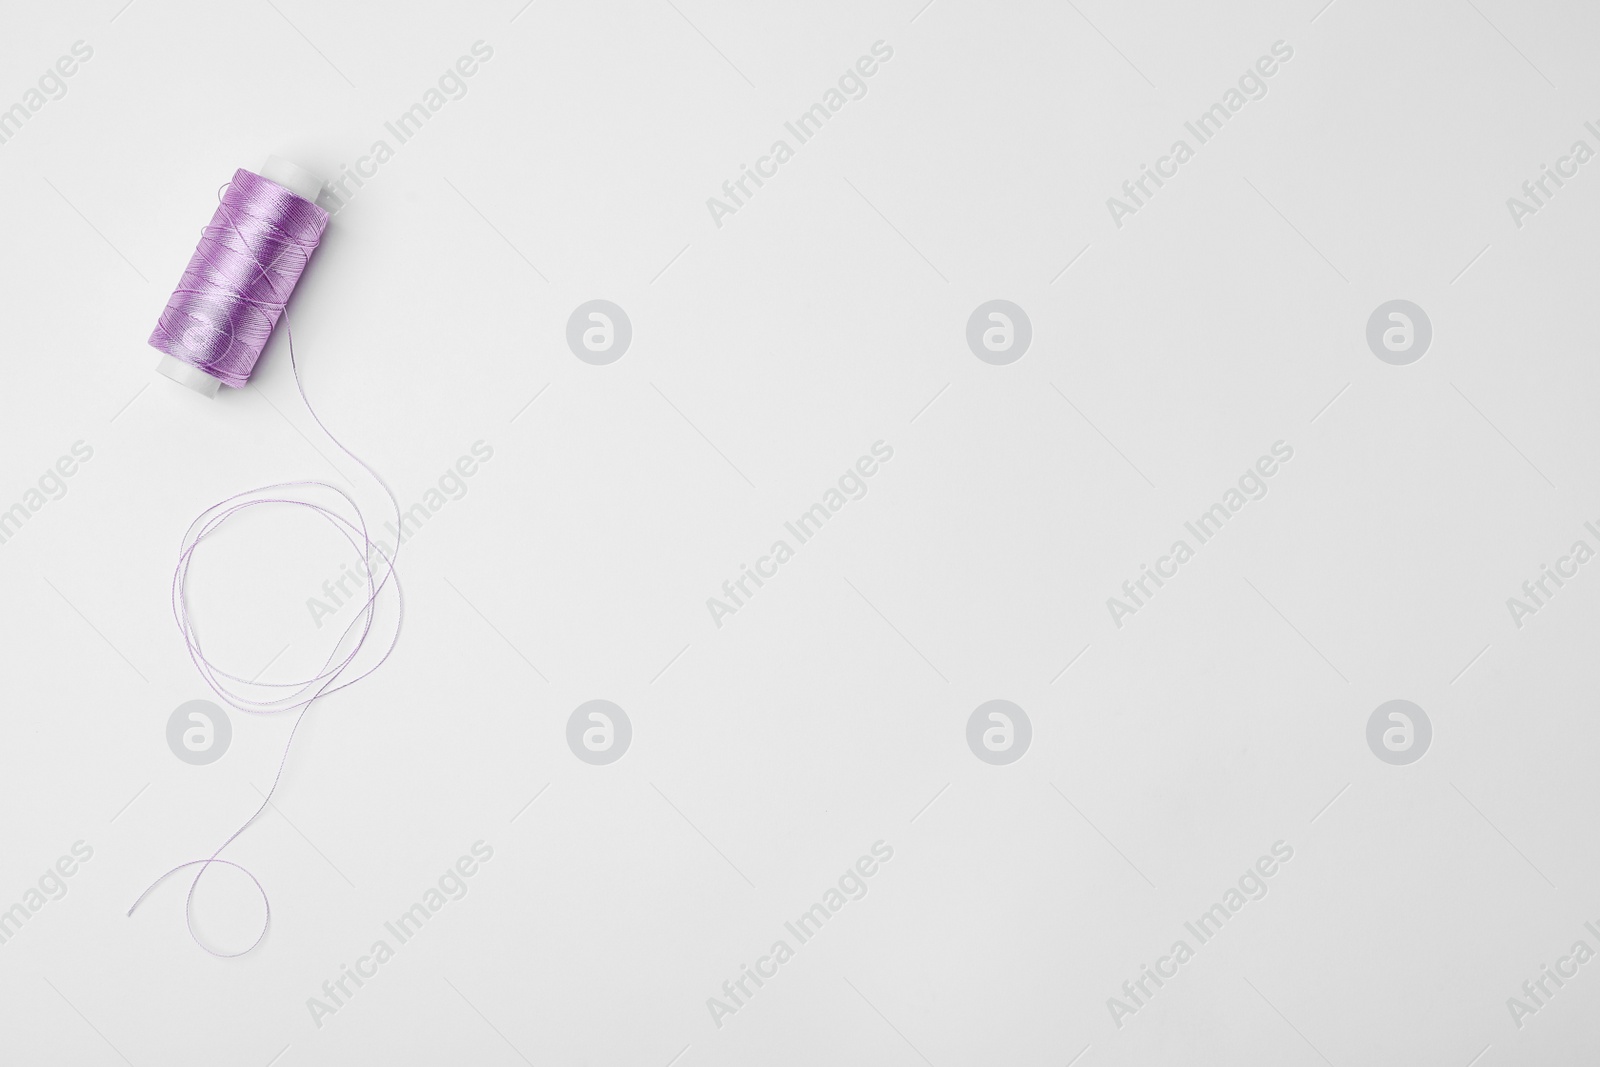 Photo of Color sewing thread on white background, top view